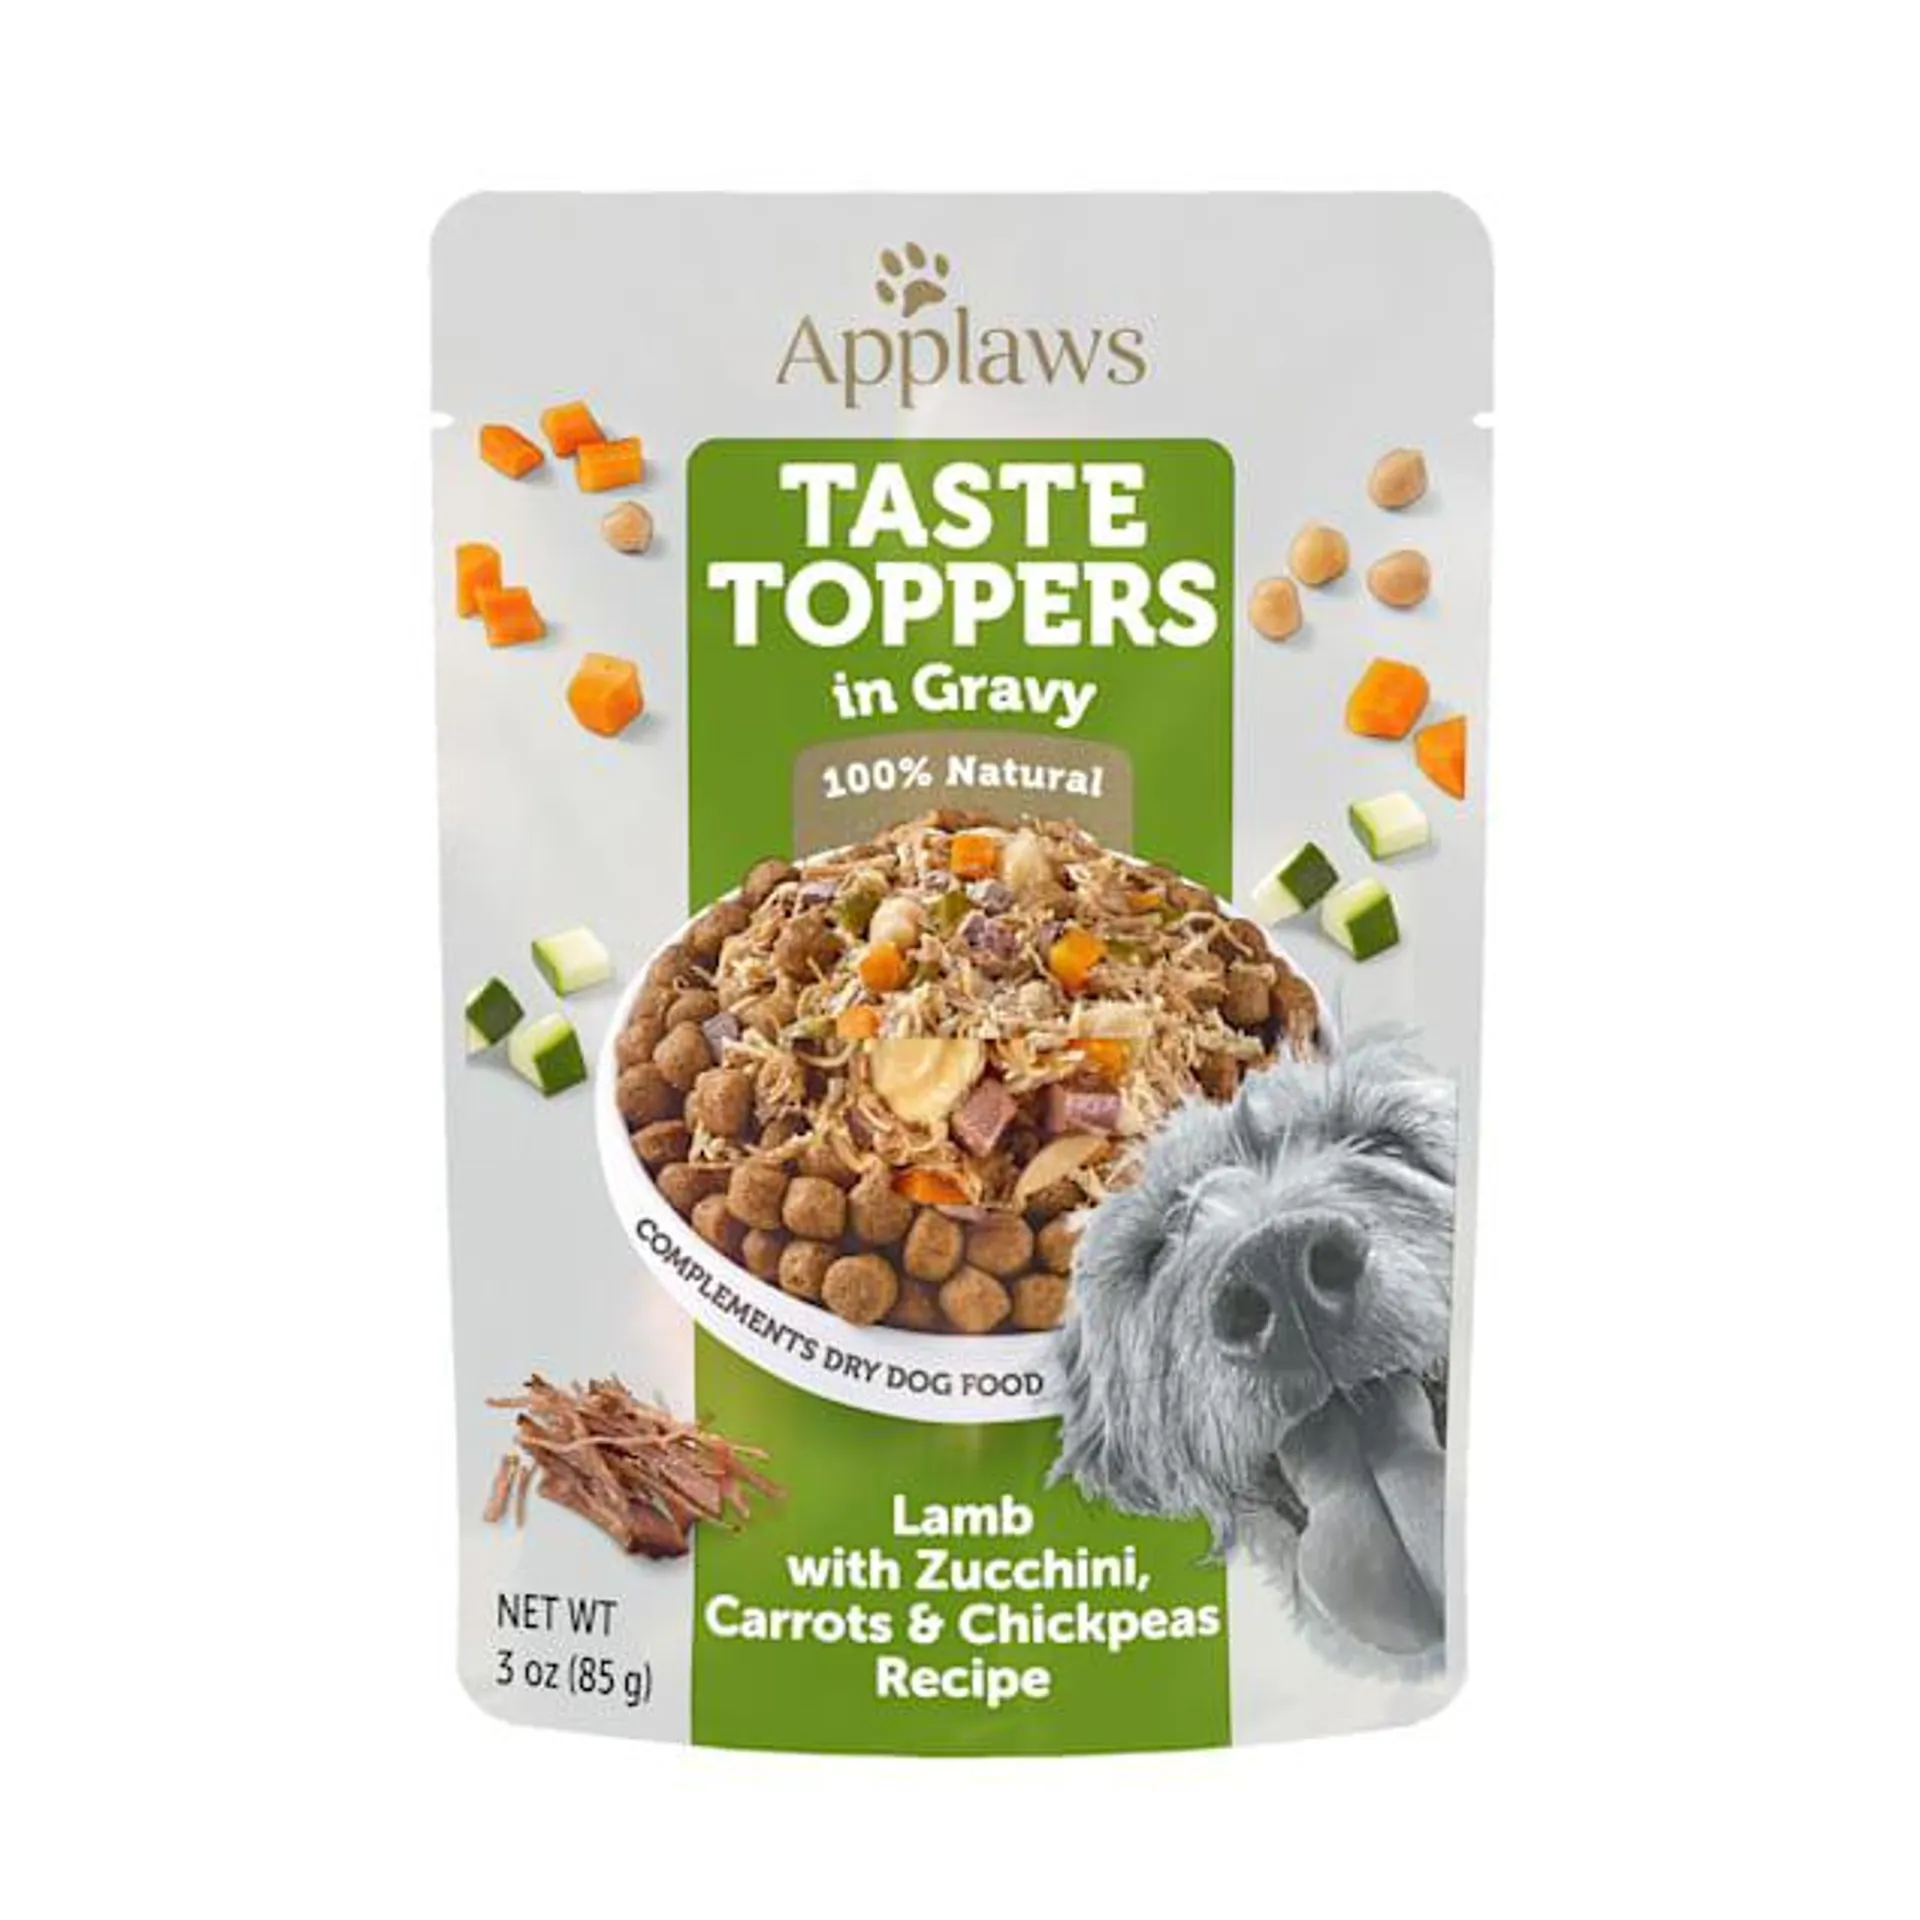 Applaws Taste Toppers Lamb with Zuccini, Carrot & Chickpeas in Gravy Wet Dog Food, 3 oz., Case of 12